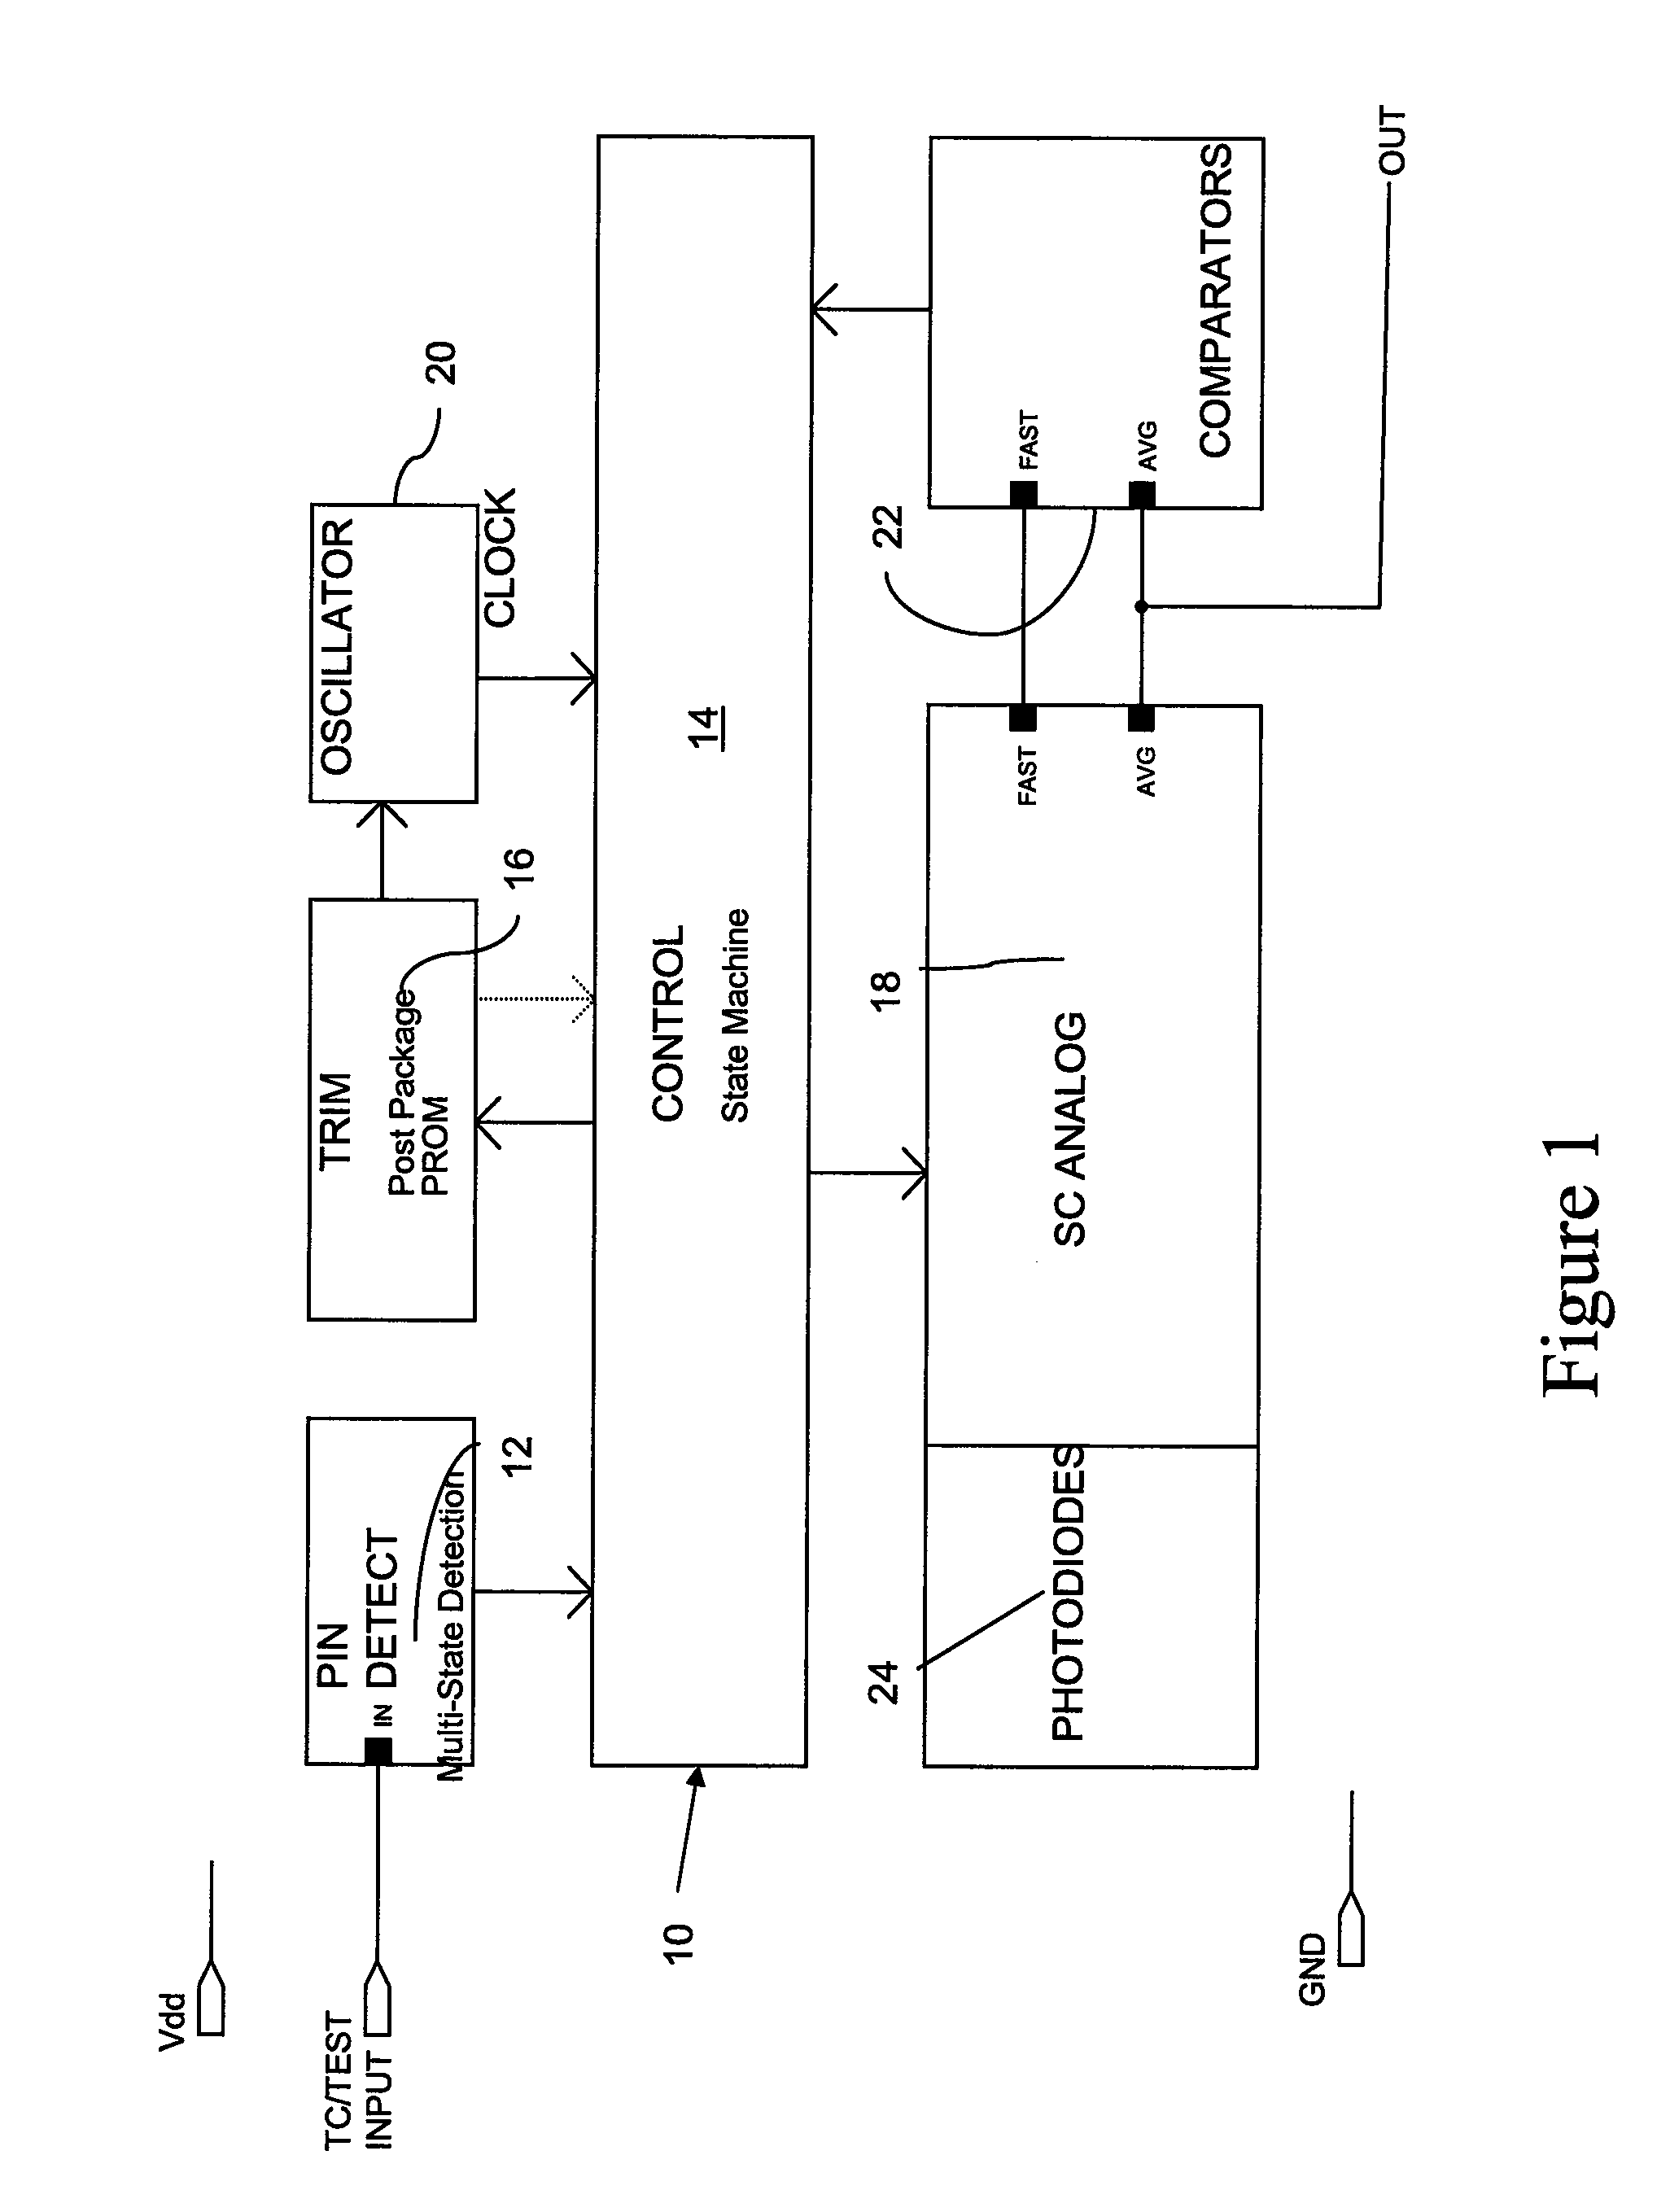 Automatic calibration circuit for optoelectronic devices